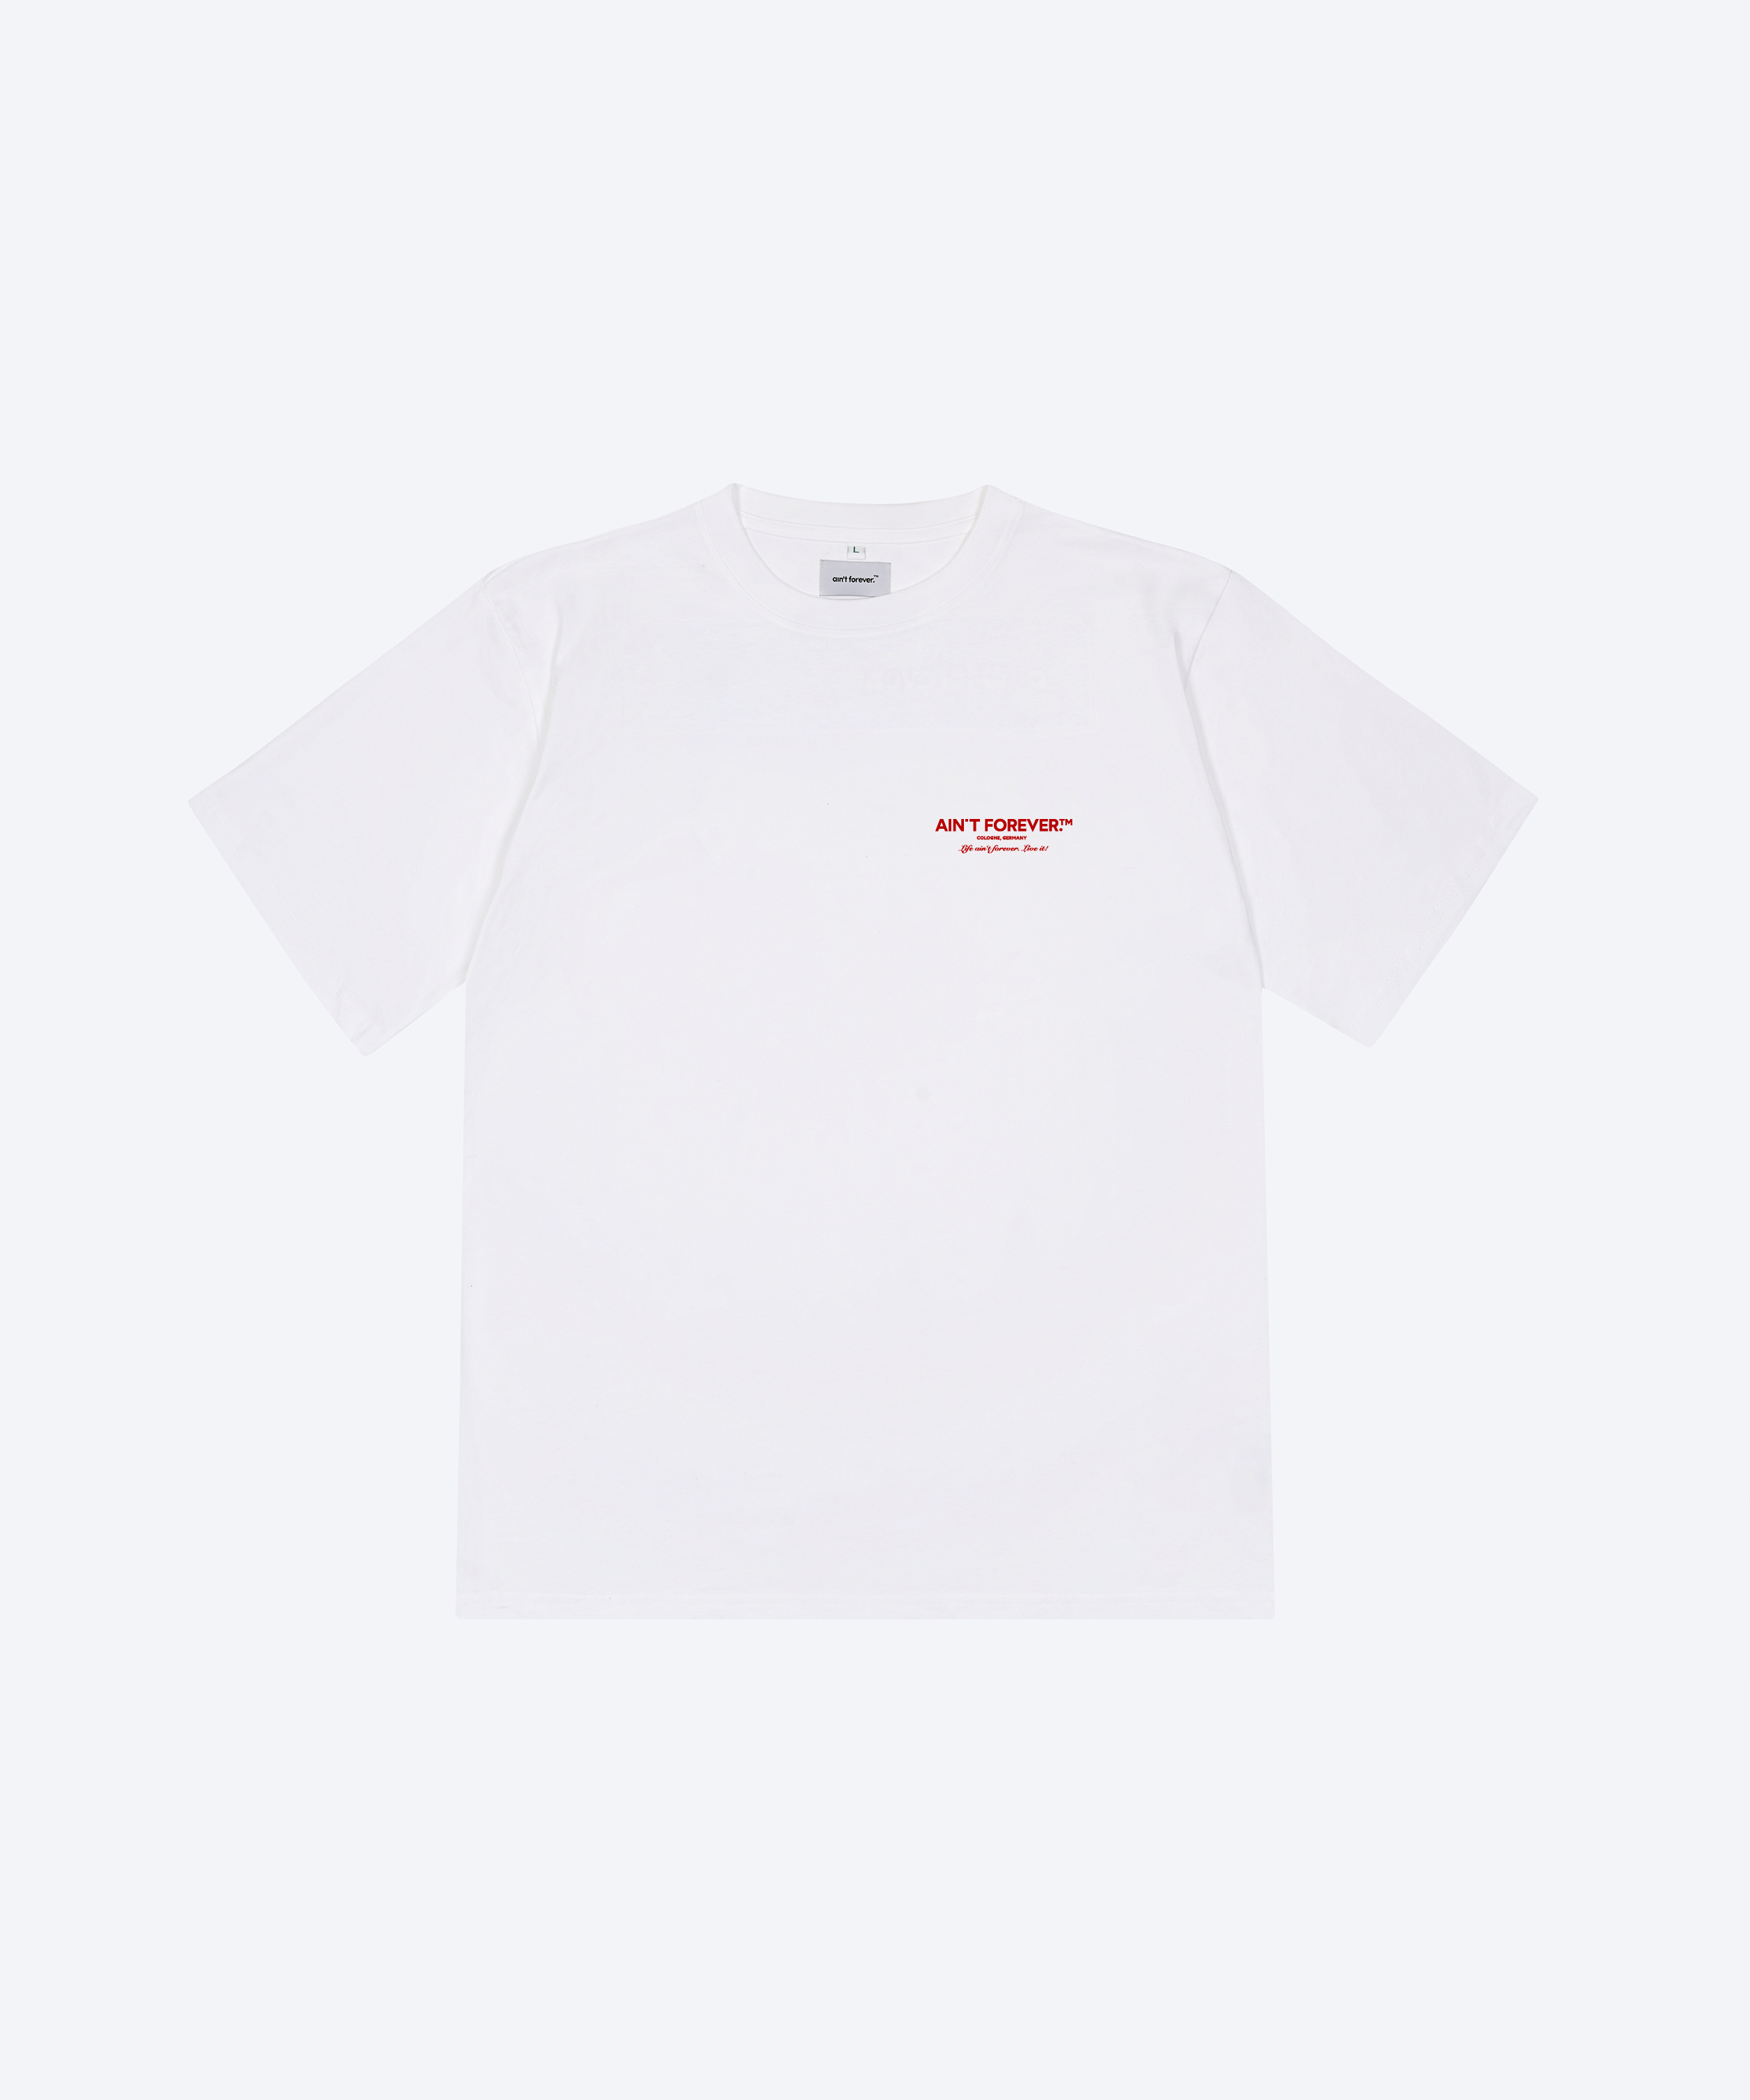 THE OVERSIZED LIVE IT! T-SHIRT (WHITE / RED)